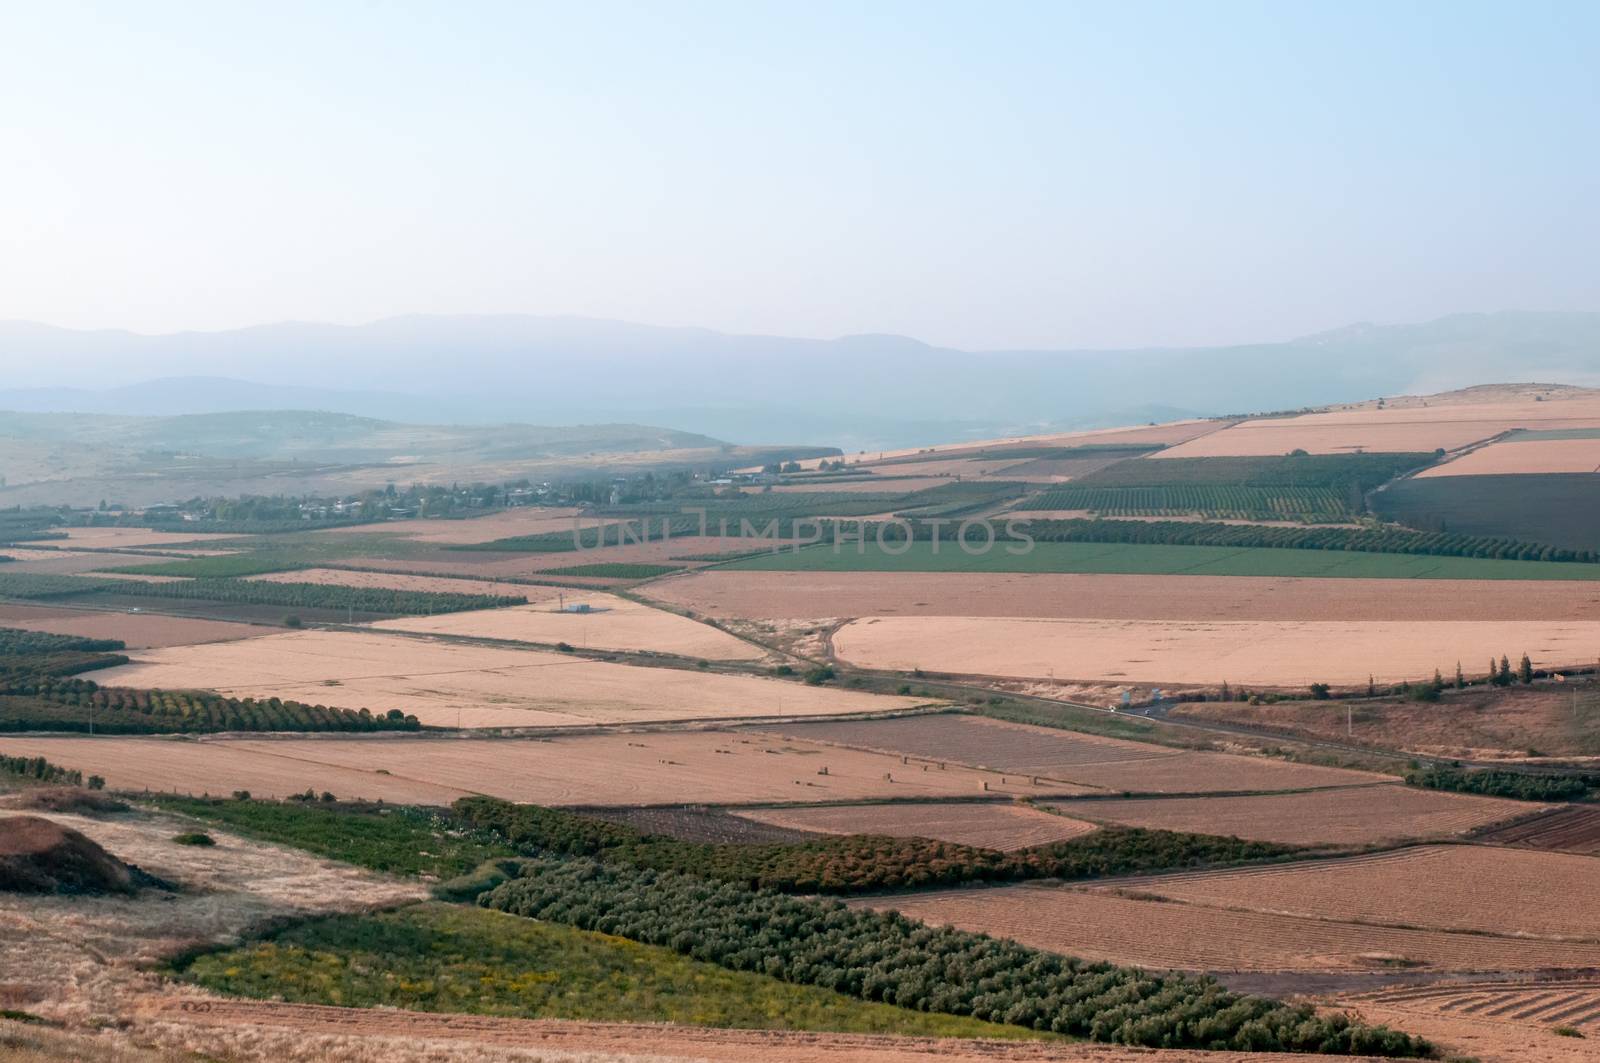 View of Galilee mountains, agriculture valley. North Israel.